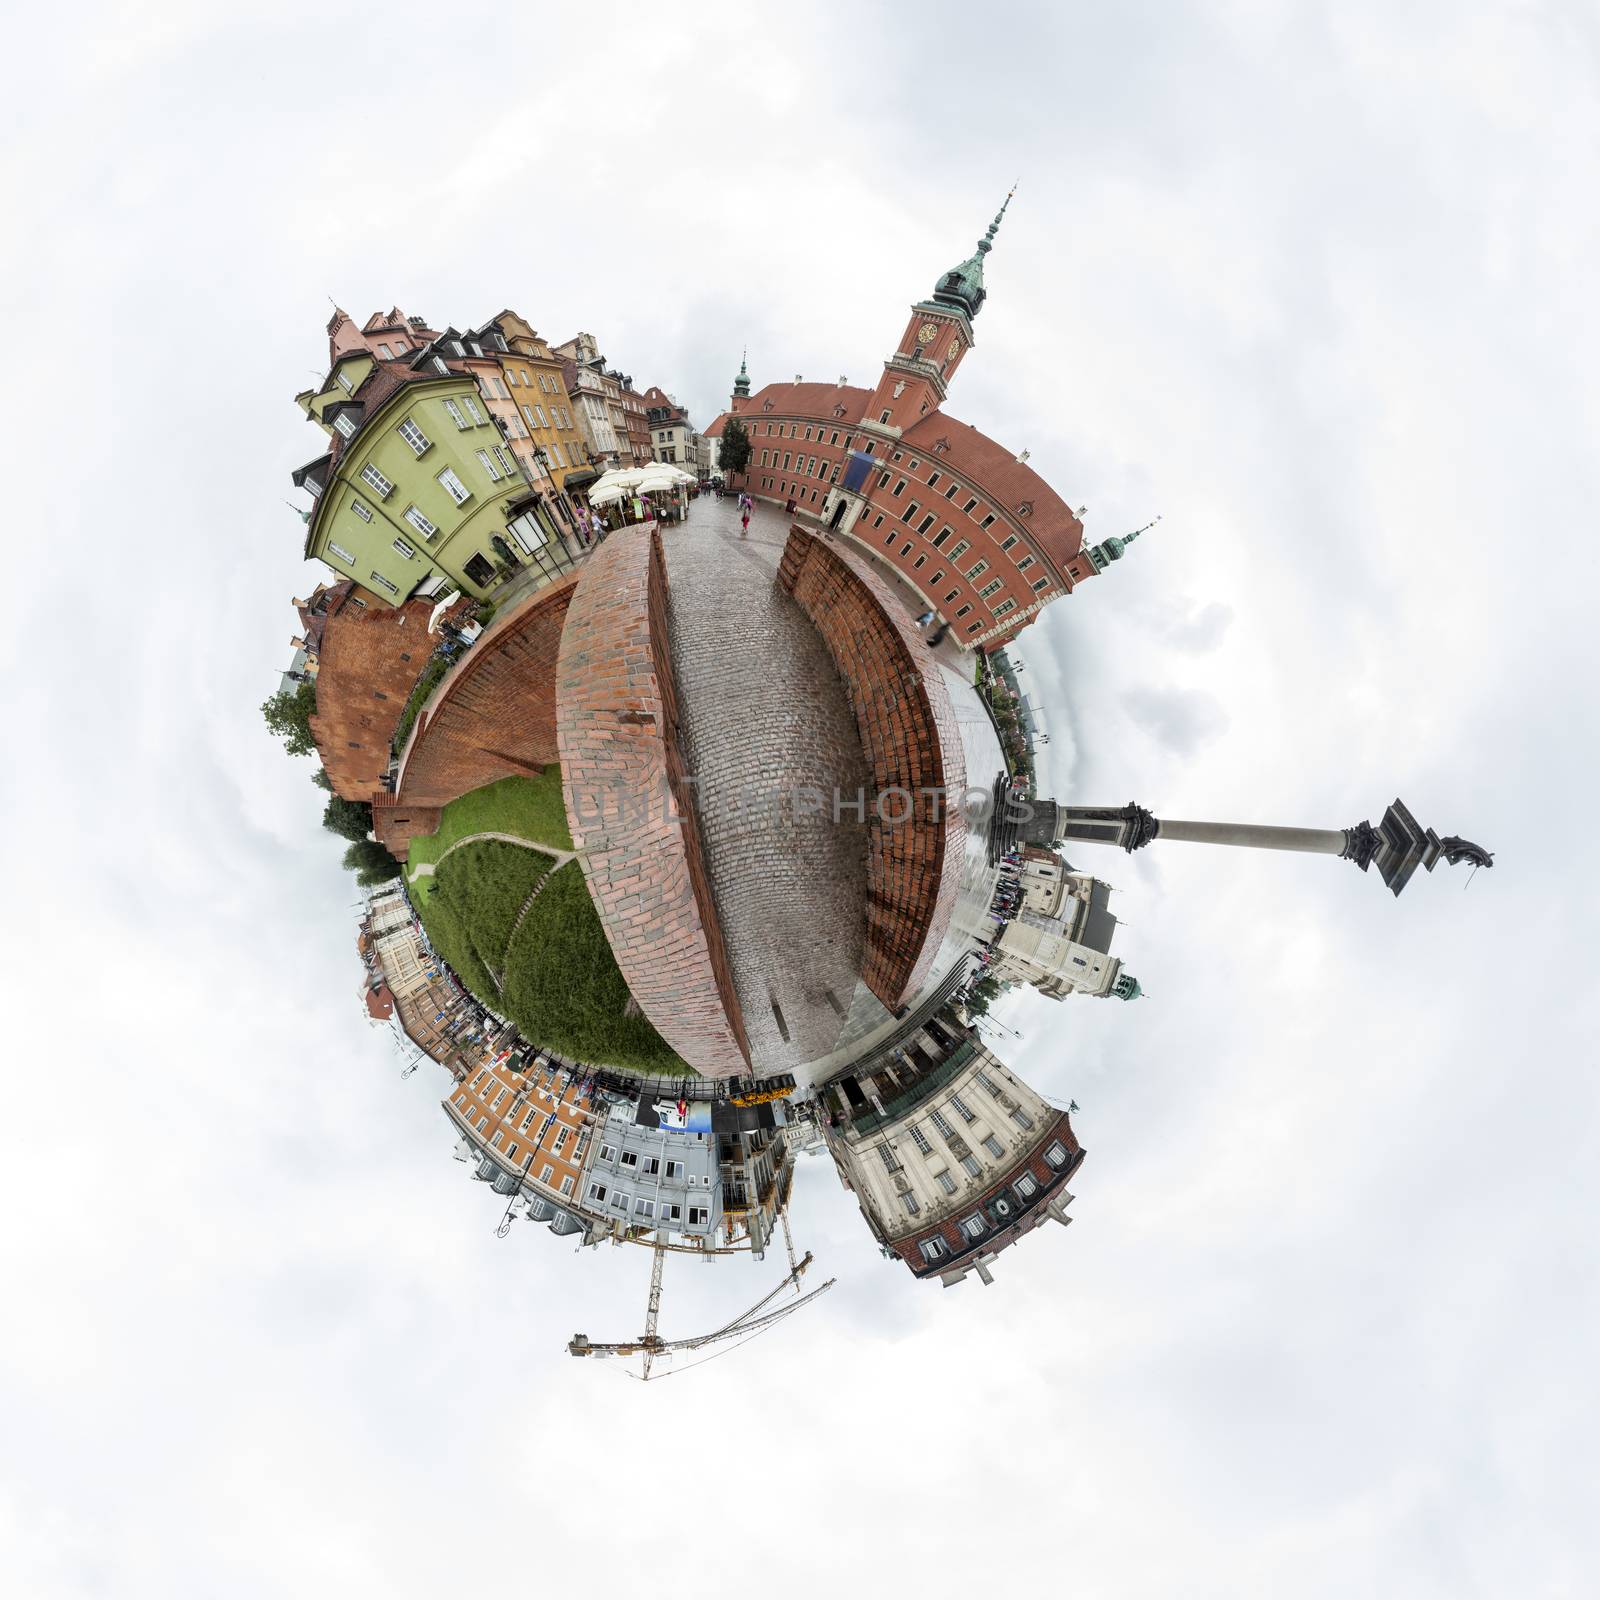 Tiny planet of the Castle Square in Old Town of Warsaw, Poland